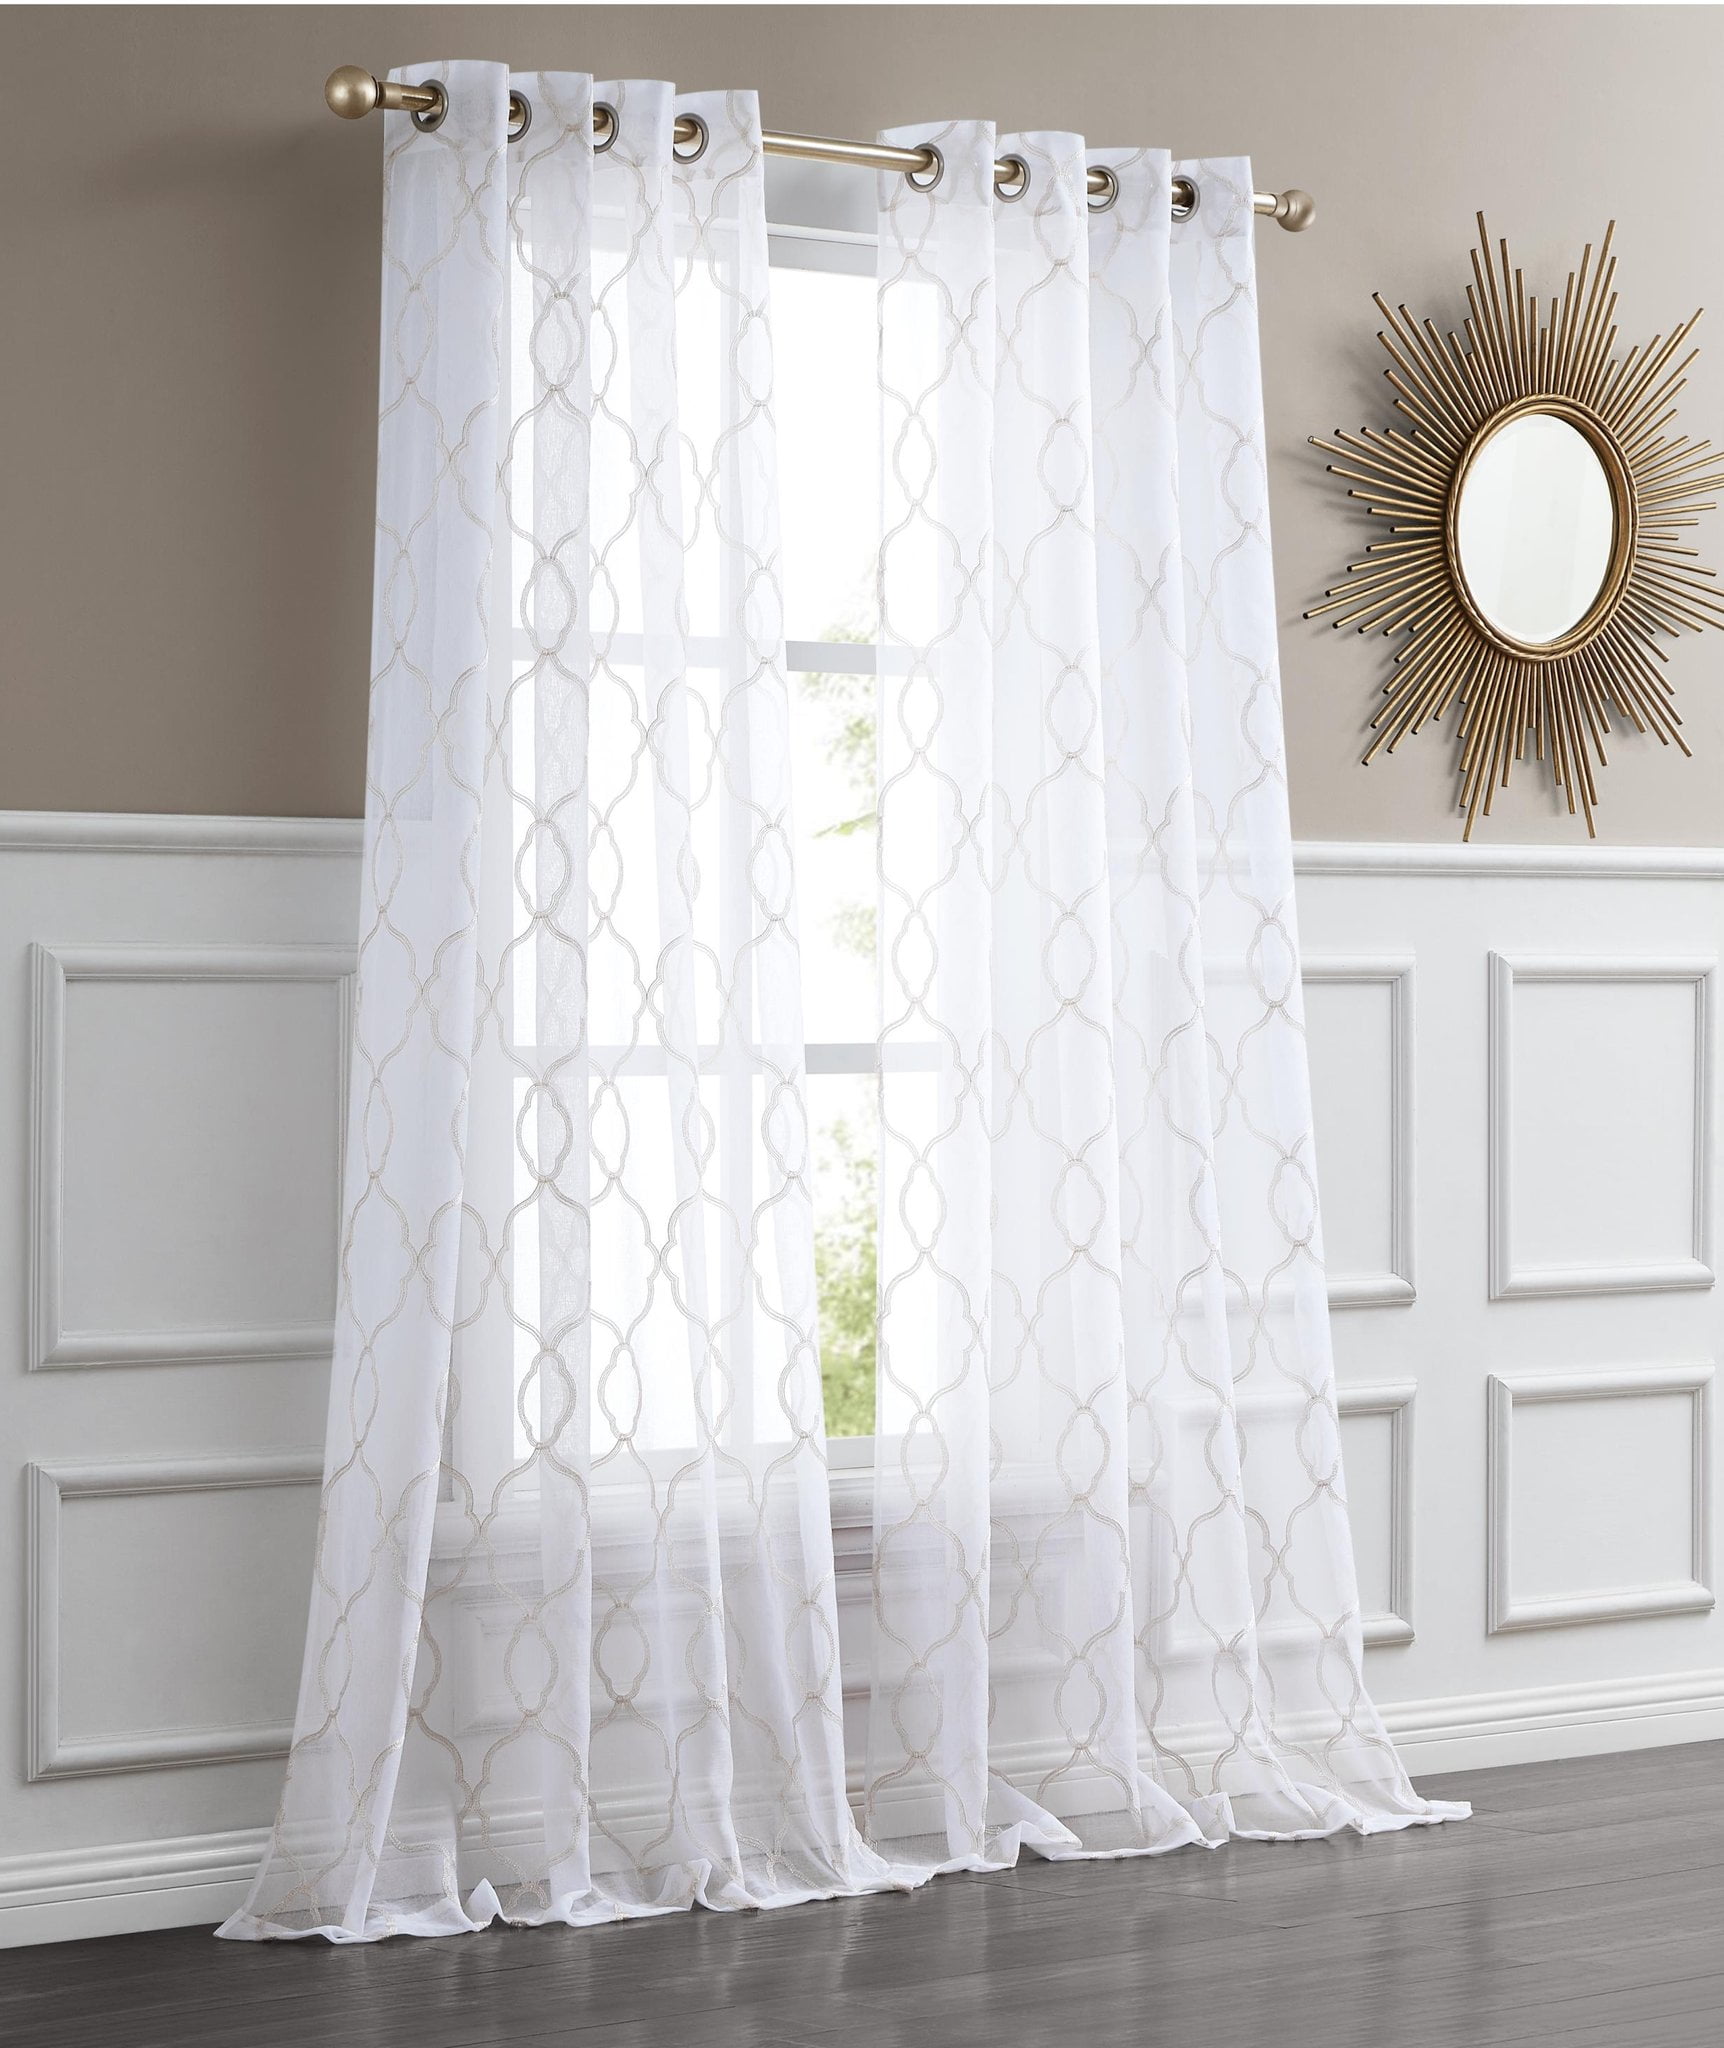 Princess Style Embroidered Sheer Curtain 3D Embroidery Yarn Tulle Curtain 1Panel 